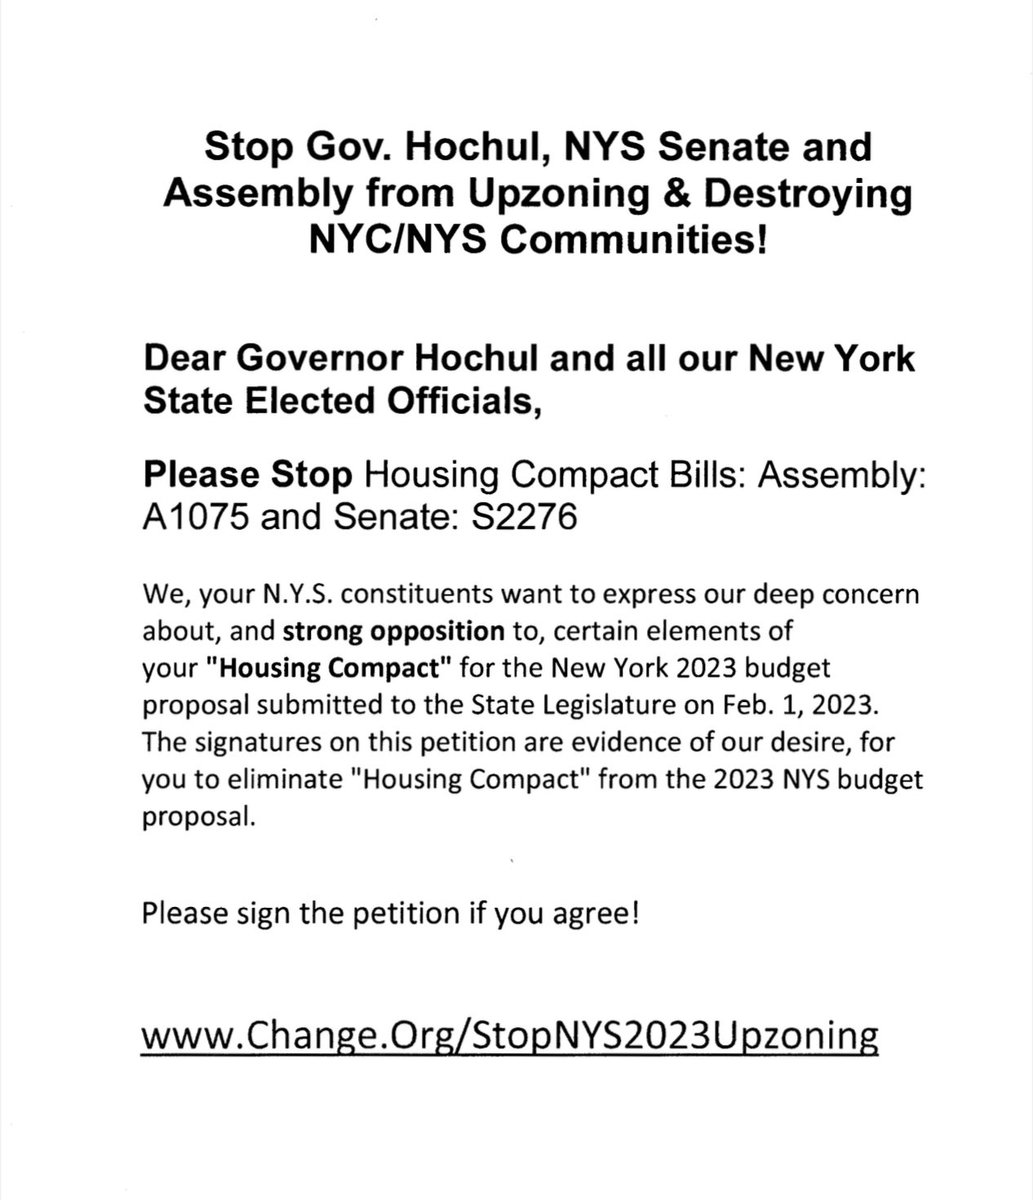 Dear Governor Hochul and all our New York State Elected Officials, Please Stop Housing Compact Bills: Assembly: A1075 and Senate: 82276 'Housing Compact' for the New York 2023 budget proposal submitted to the State Legislature on Feb. 1, 2023.